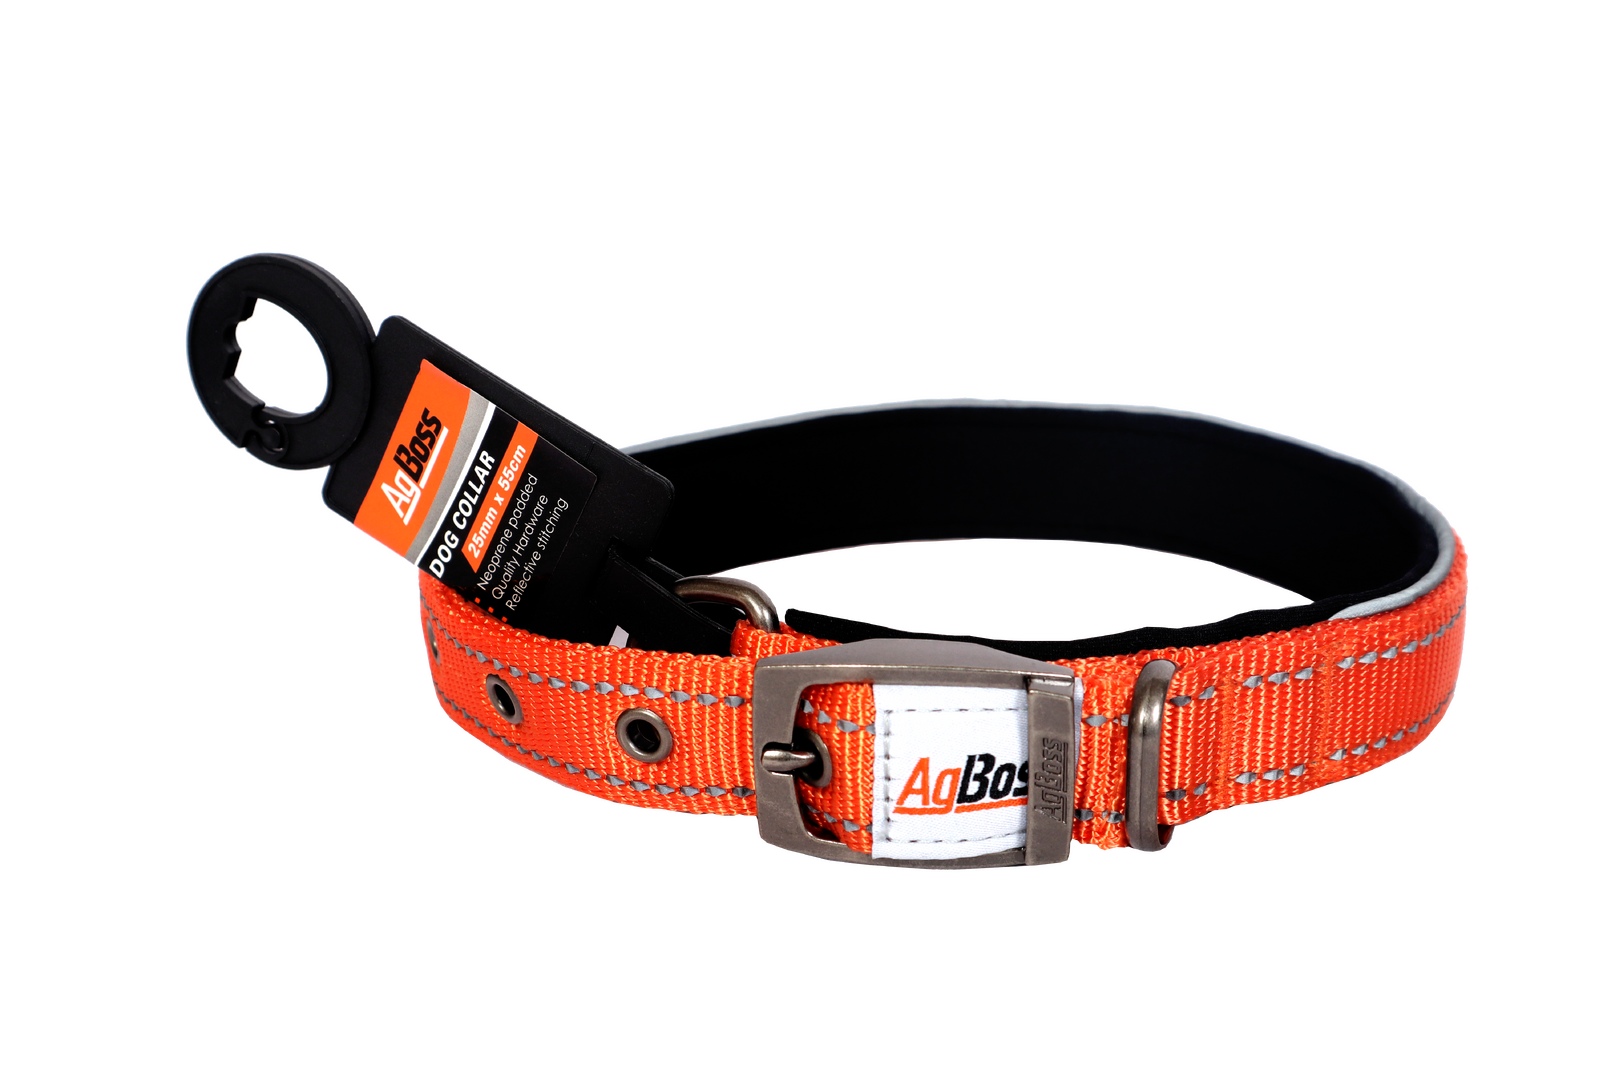 AgBoss Orange Dog Collar - Durable, Weather-Resistant, and Adjustable